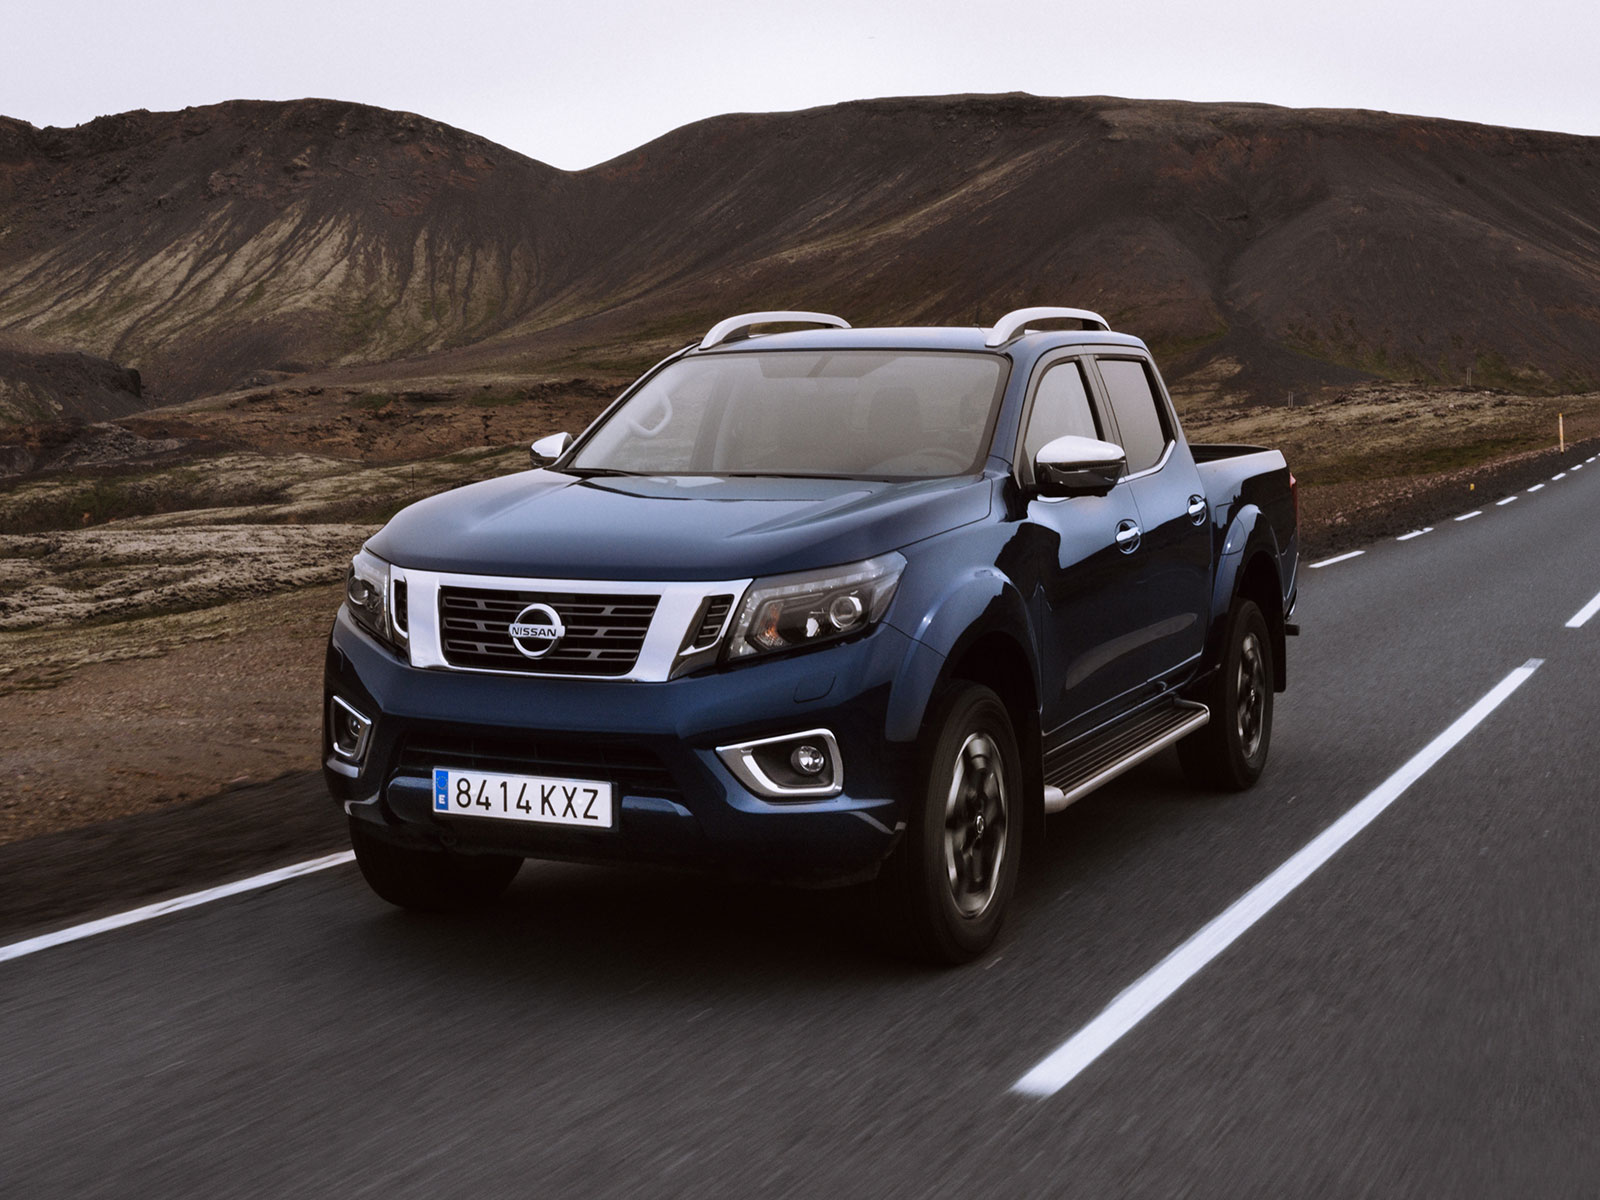 Nissan Navara Double Cab Blue Iceland Dynamic Front 7 source